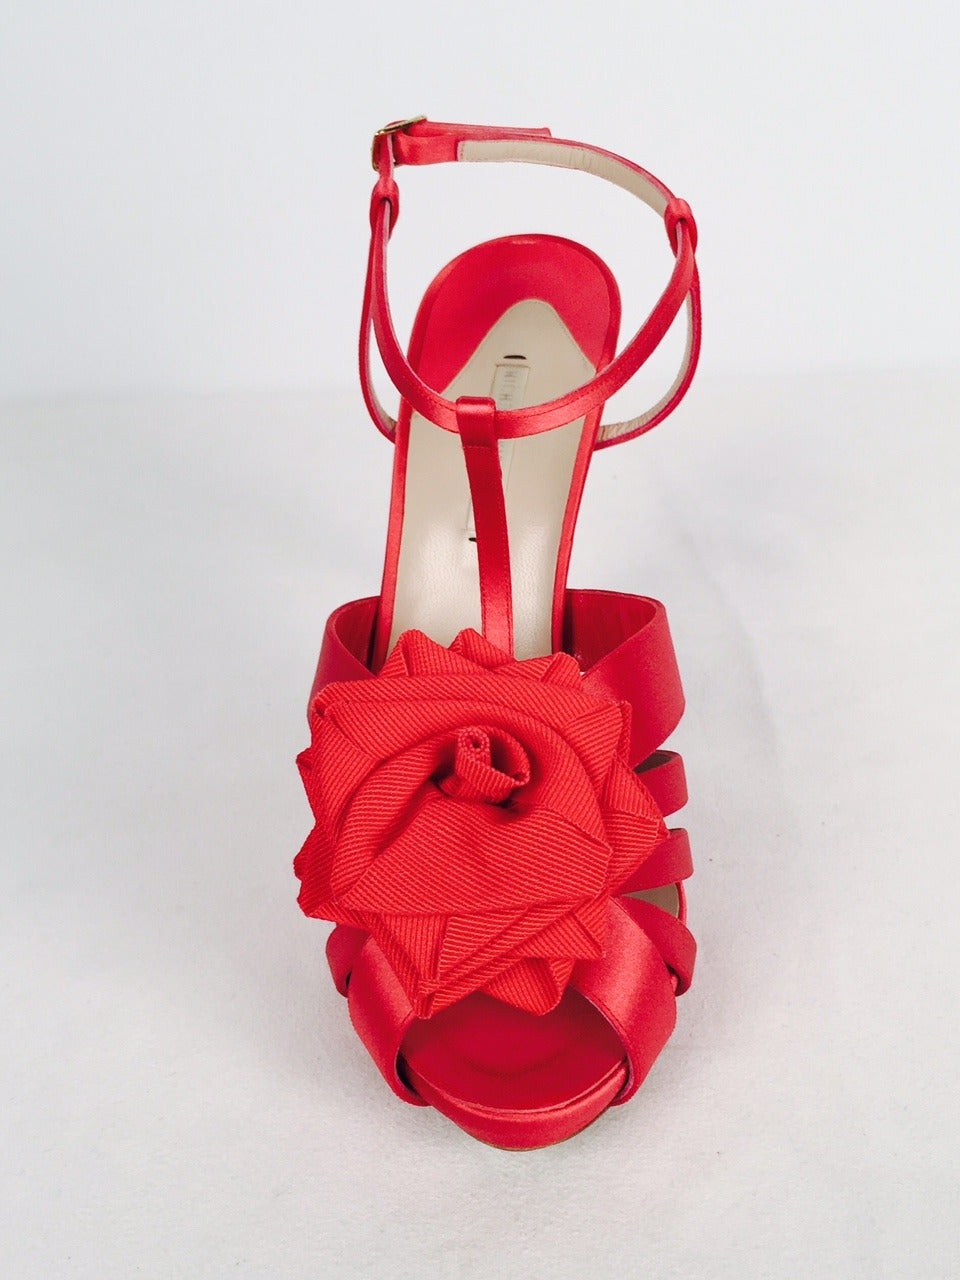 Scale new heights in these brand new Nicholas Kirkwood red satin high heel platform sandals.  Features include T-Strap construction and 5 strap vamp.  The piece de resistance?  A glorious rose in full bloom crafted from luxurious red grosgrain